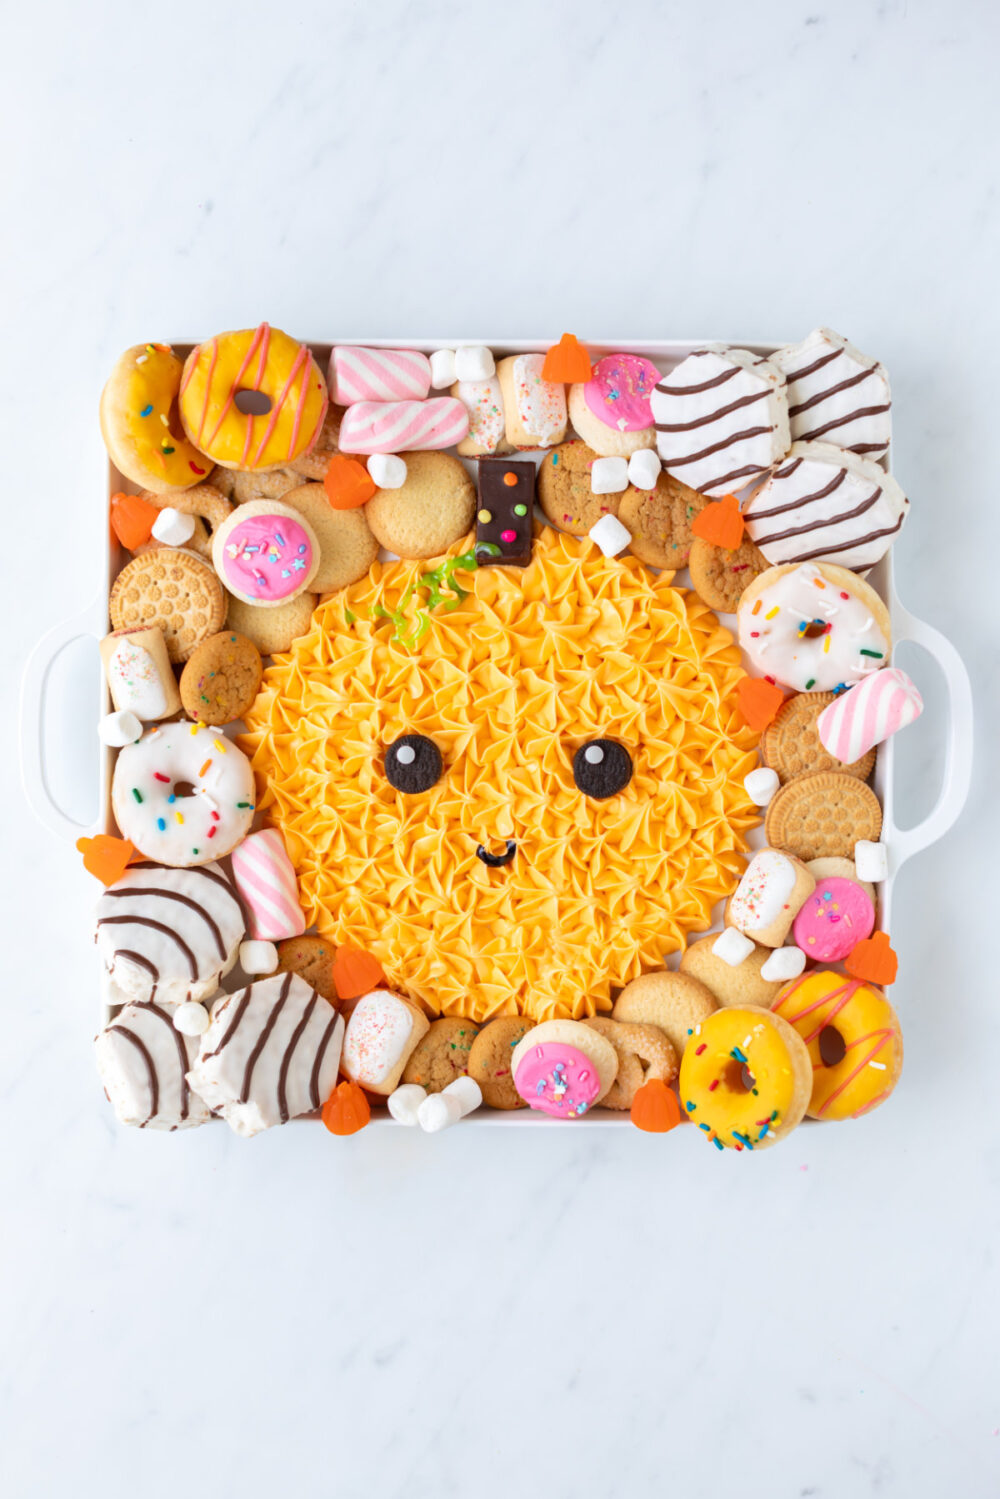 Cakes, candies, donuts, and cookies around an icing pumpkin on a board. 